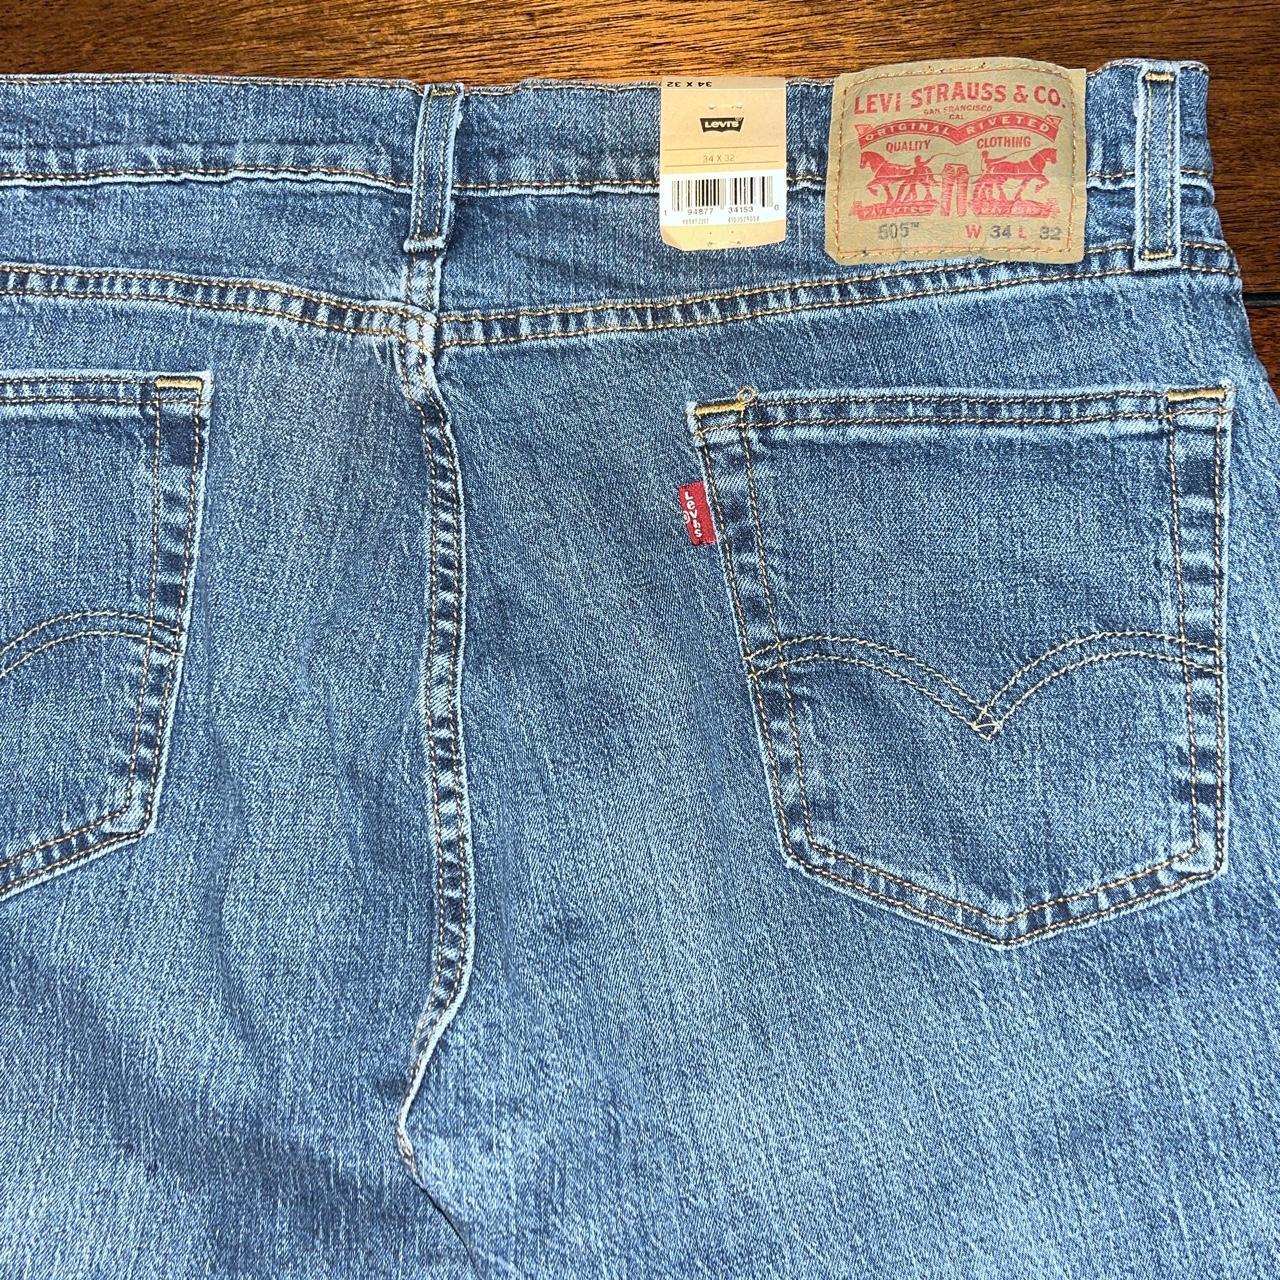 Levi’s 505 Jeans | Size 34/32 Brand new with... - Depop